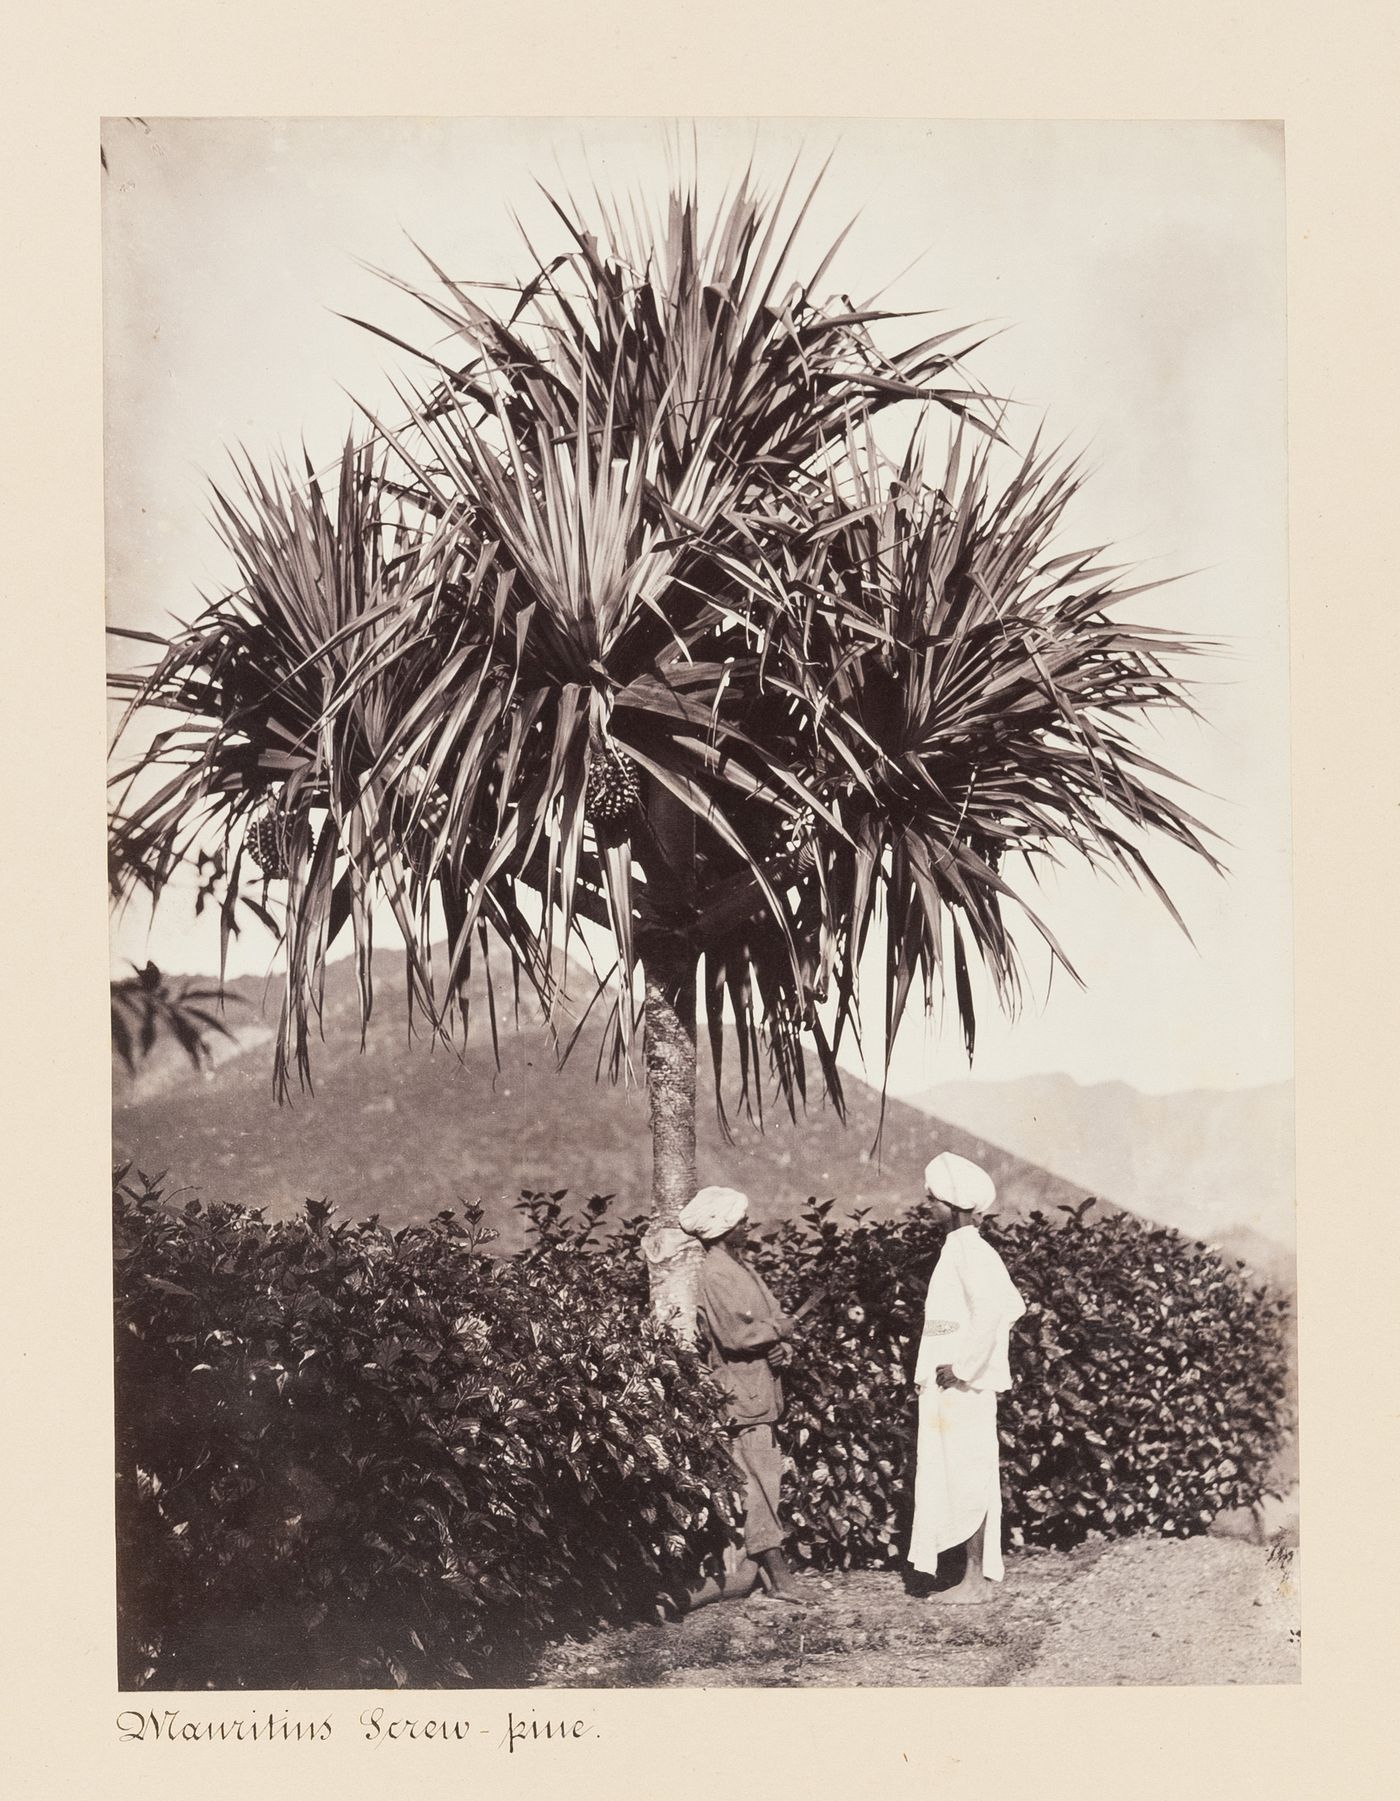 View of people in front of a Mauritius Screw-pine, Ceylon (now Sri Lanka)